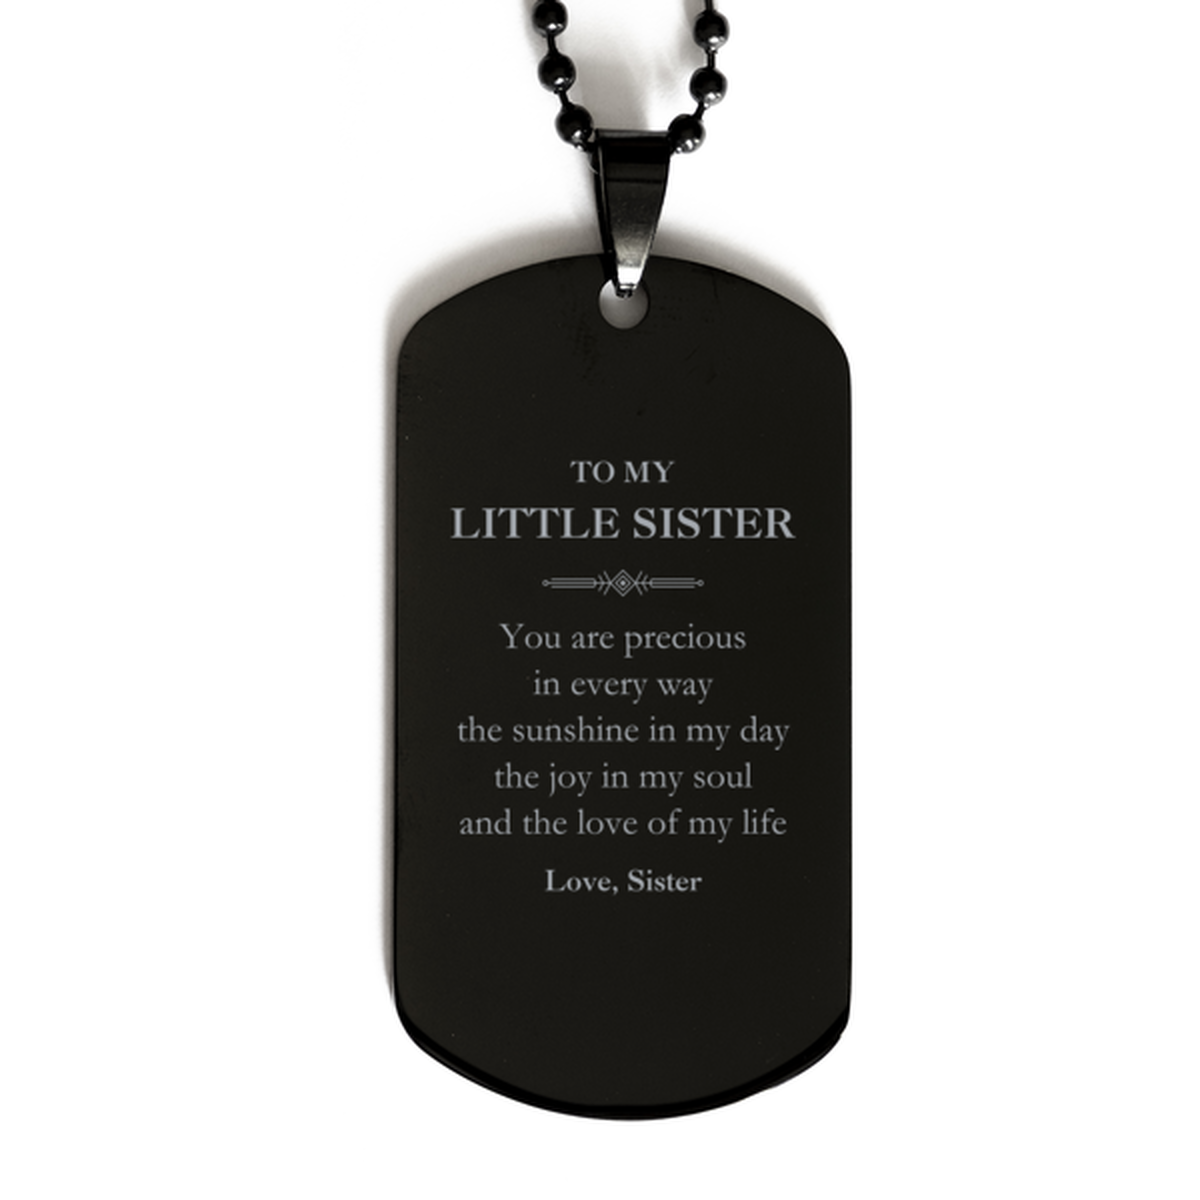 Graduation Gifts for Little Sister Black Dog Tag Present from Sister, Christmas Little Sister Birthday Gifts Little Sister You are precious in every way the sunshine in my day. Love, Sister